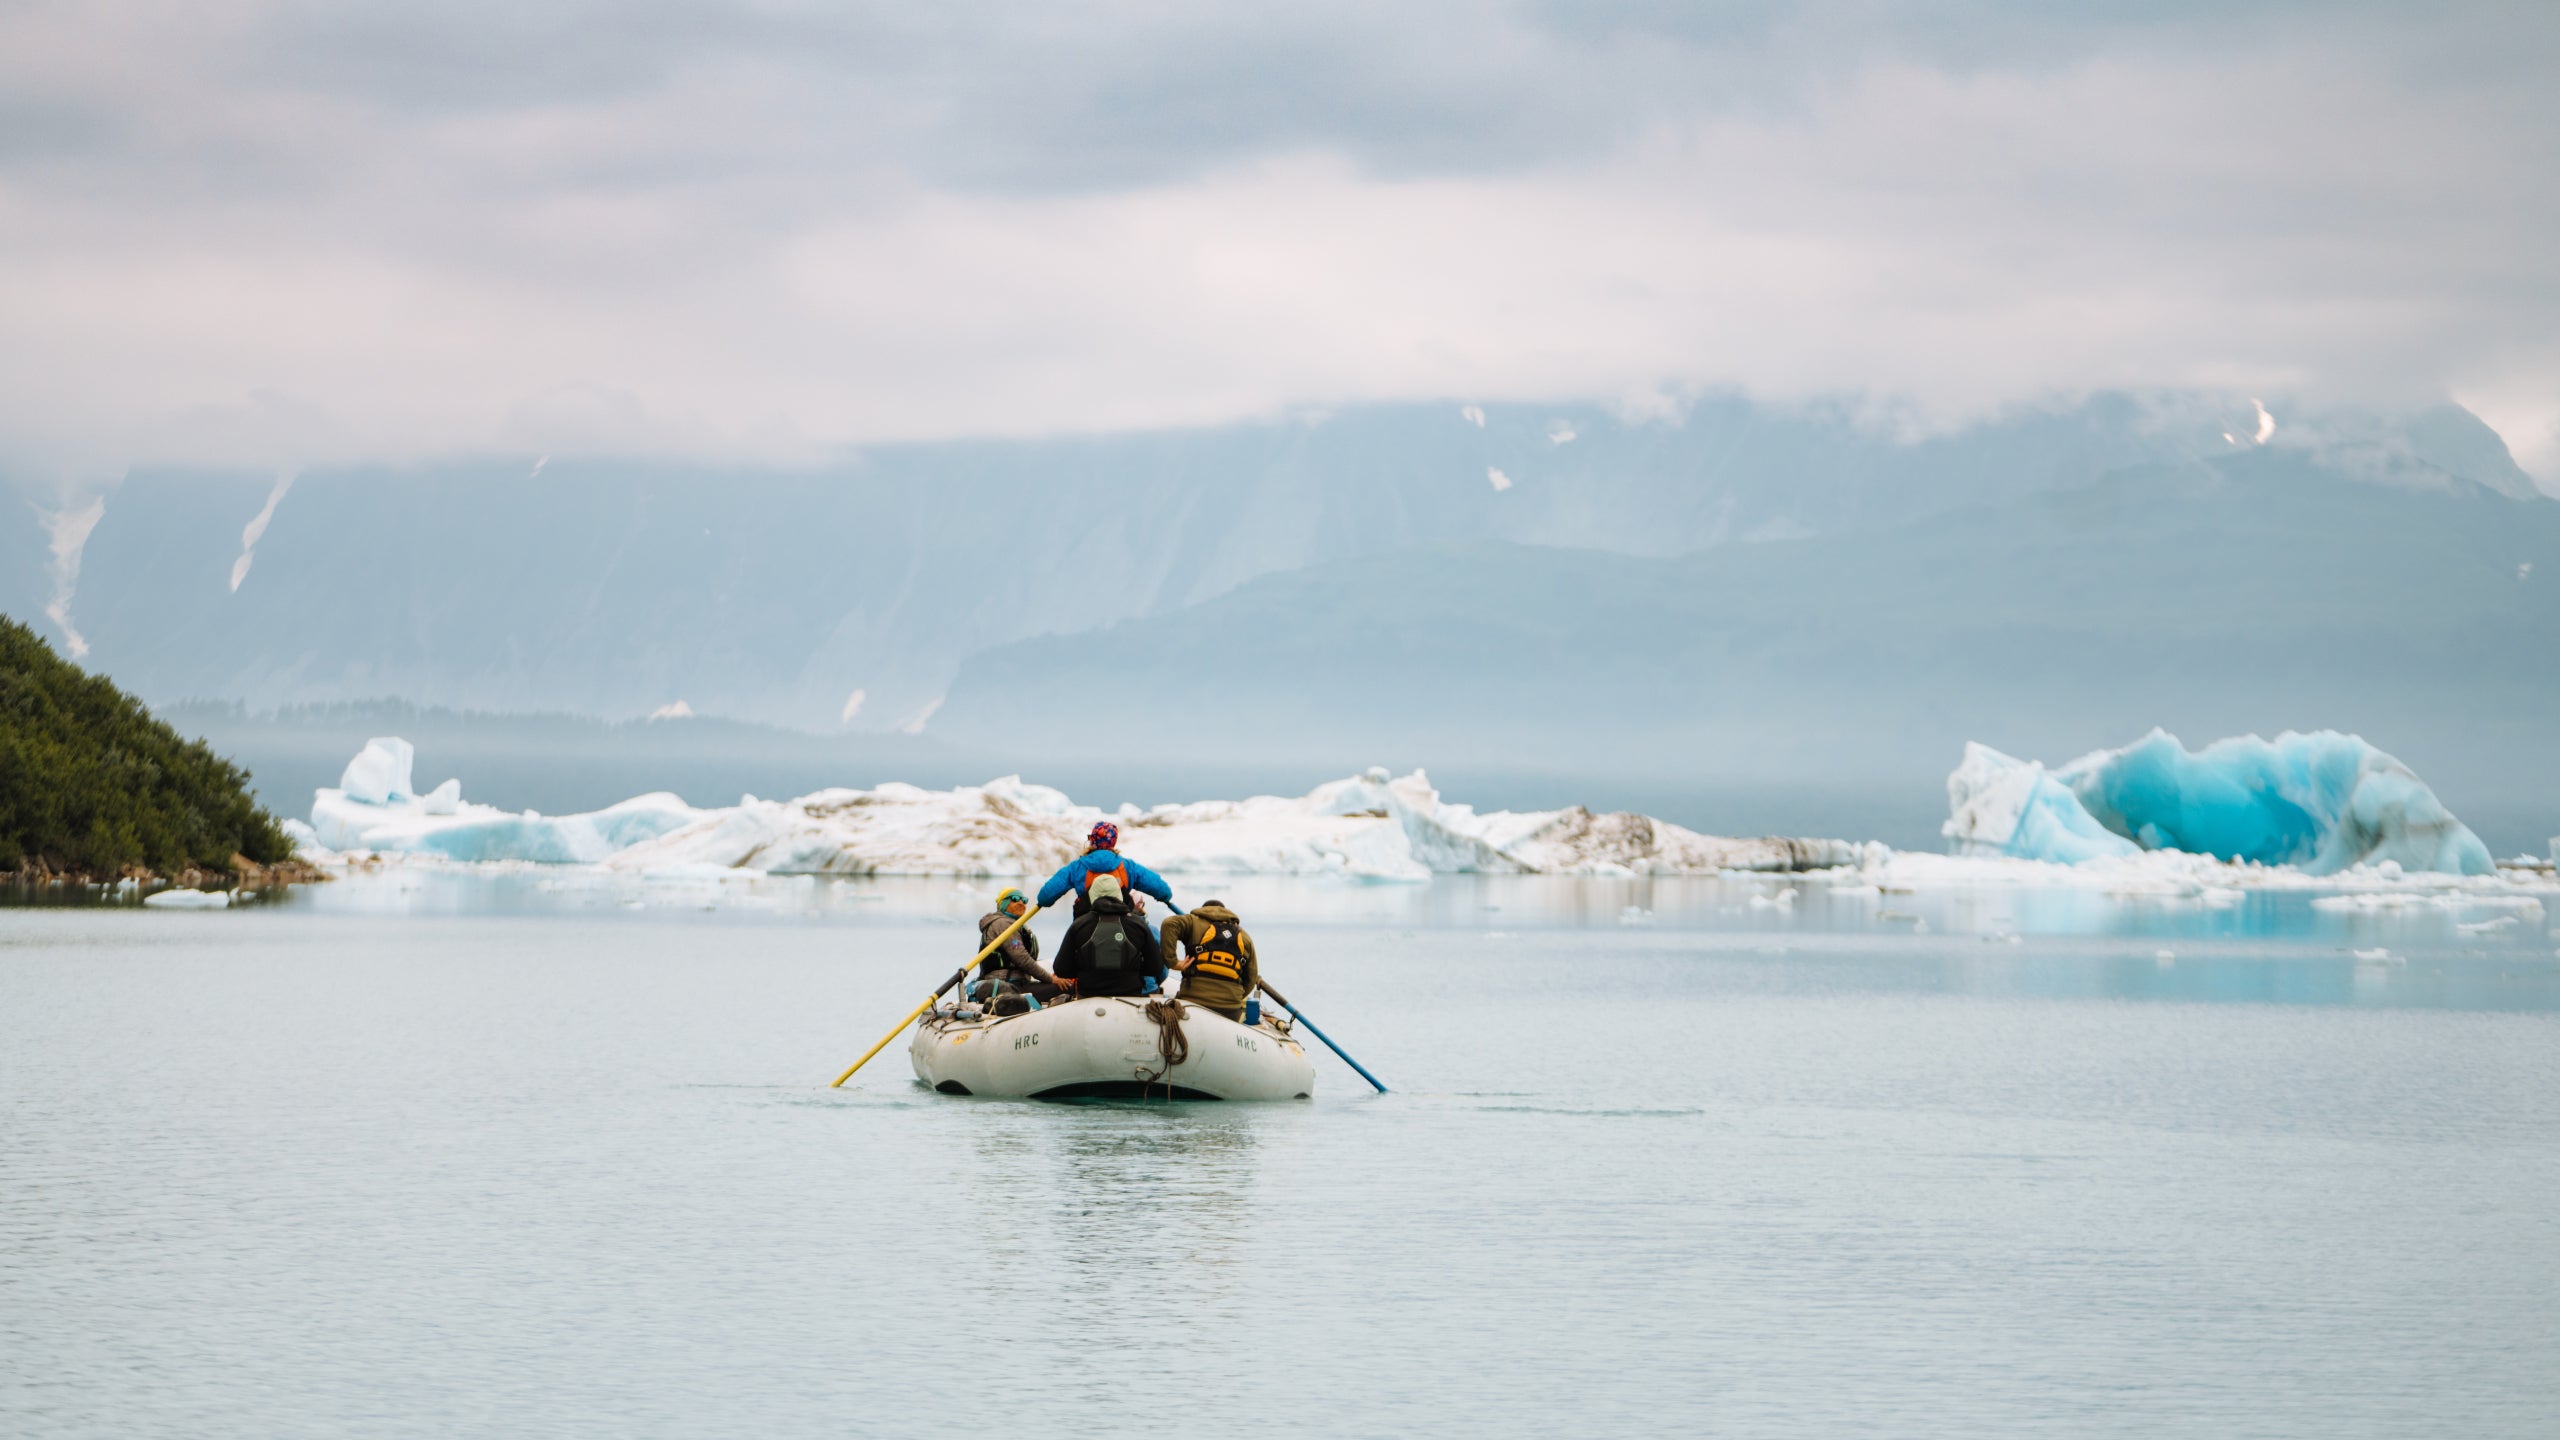 A raft on the Tatshenshini river surrounded by icebergs